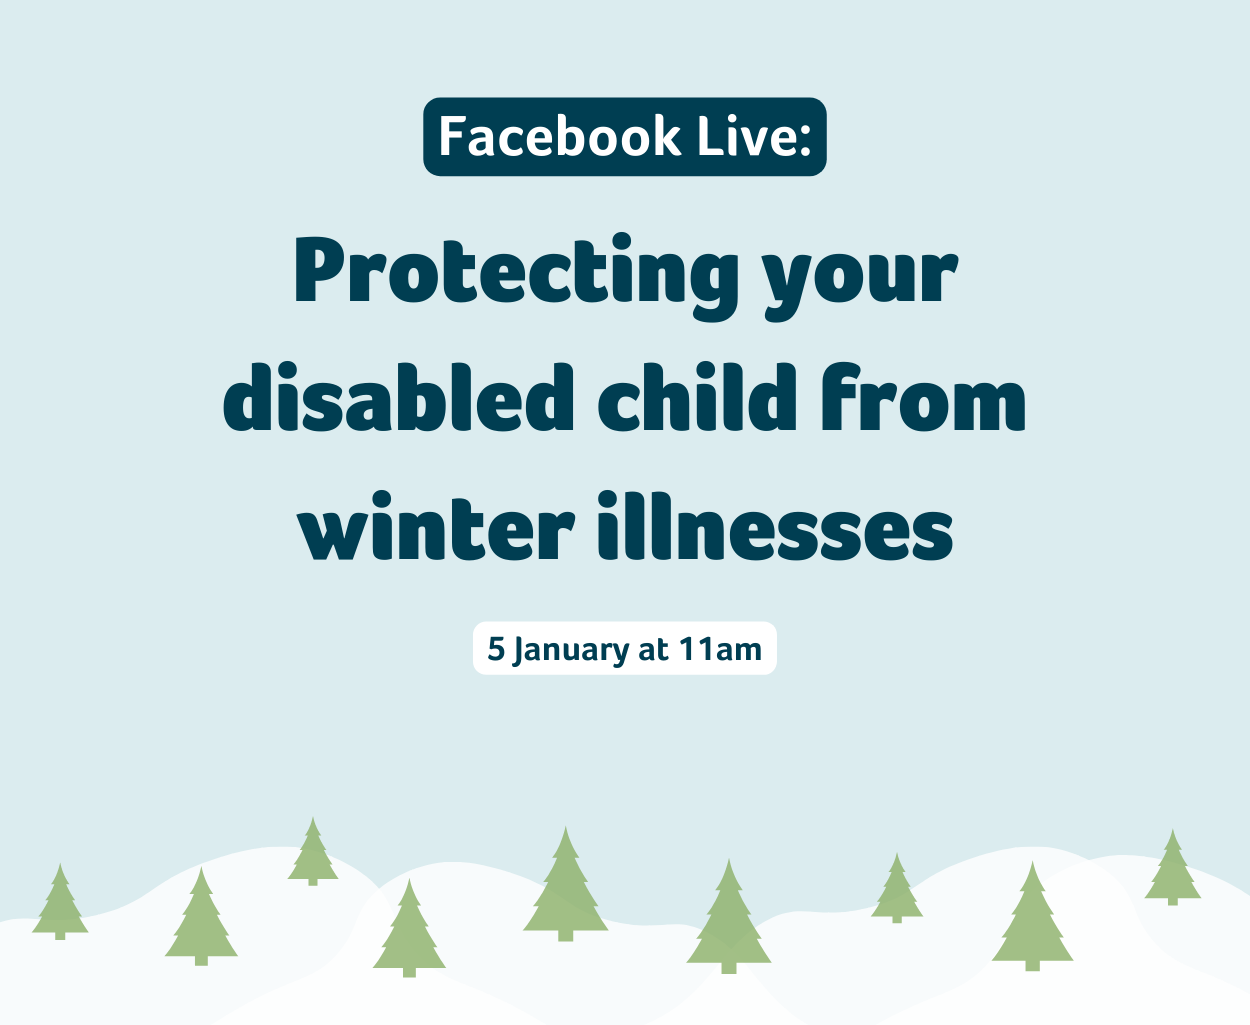 Blue banner with snowy mountains and green trees. Dark blue text that says: "Facebook Live: Protecting your disabled child from winter illnesses - 5 January at 11am"